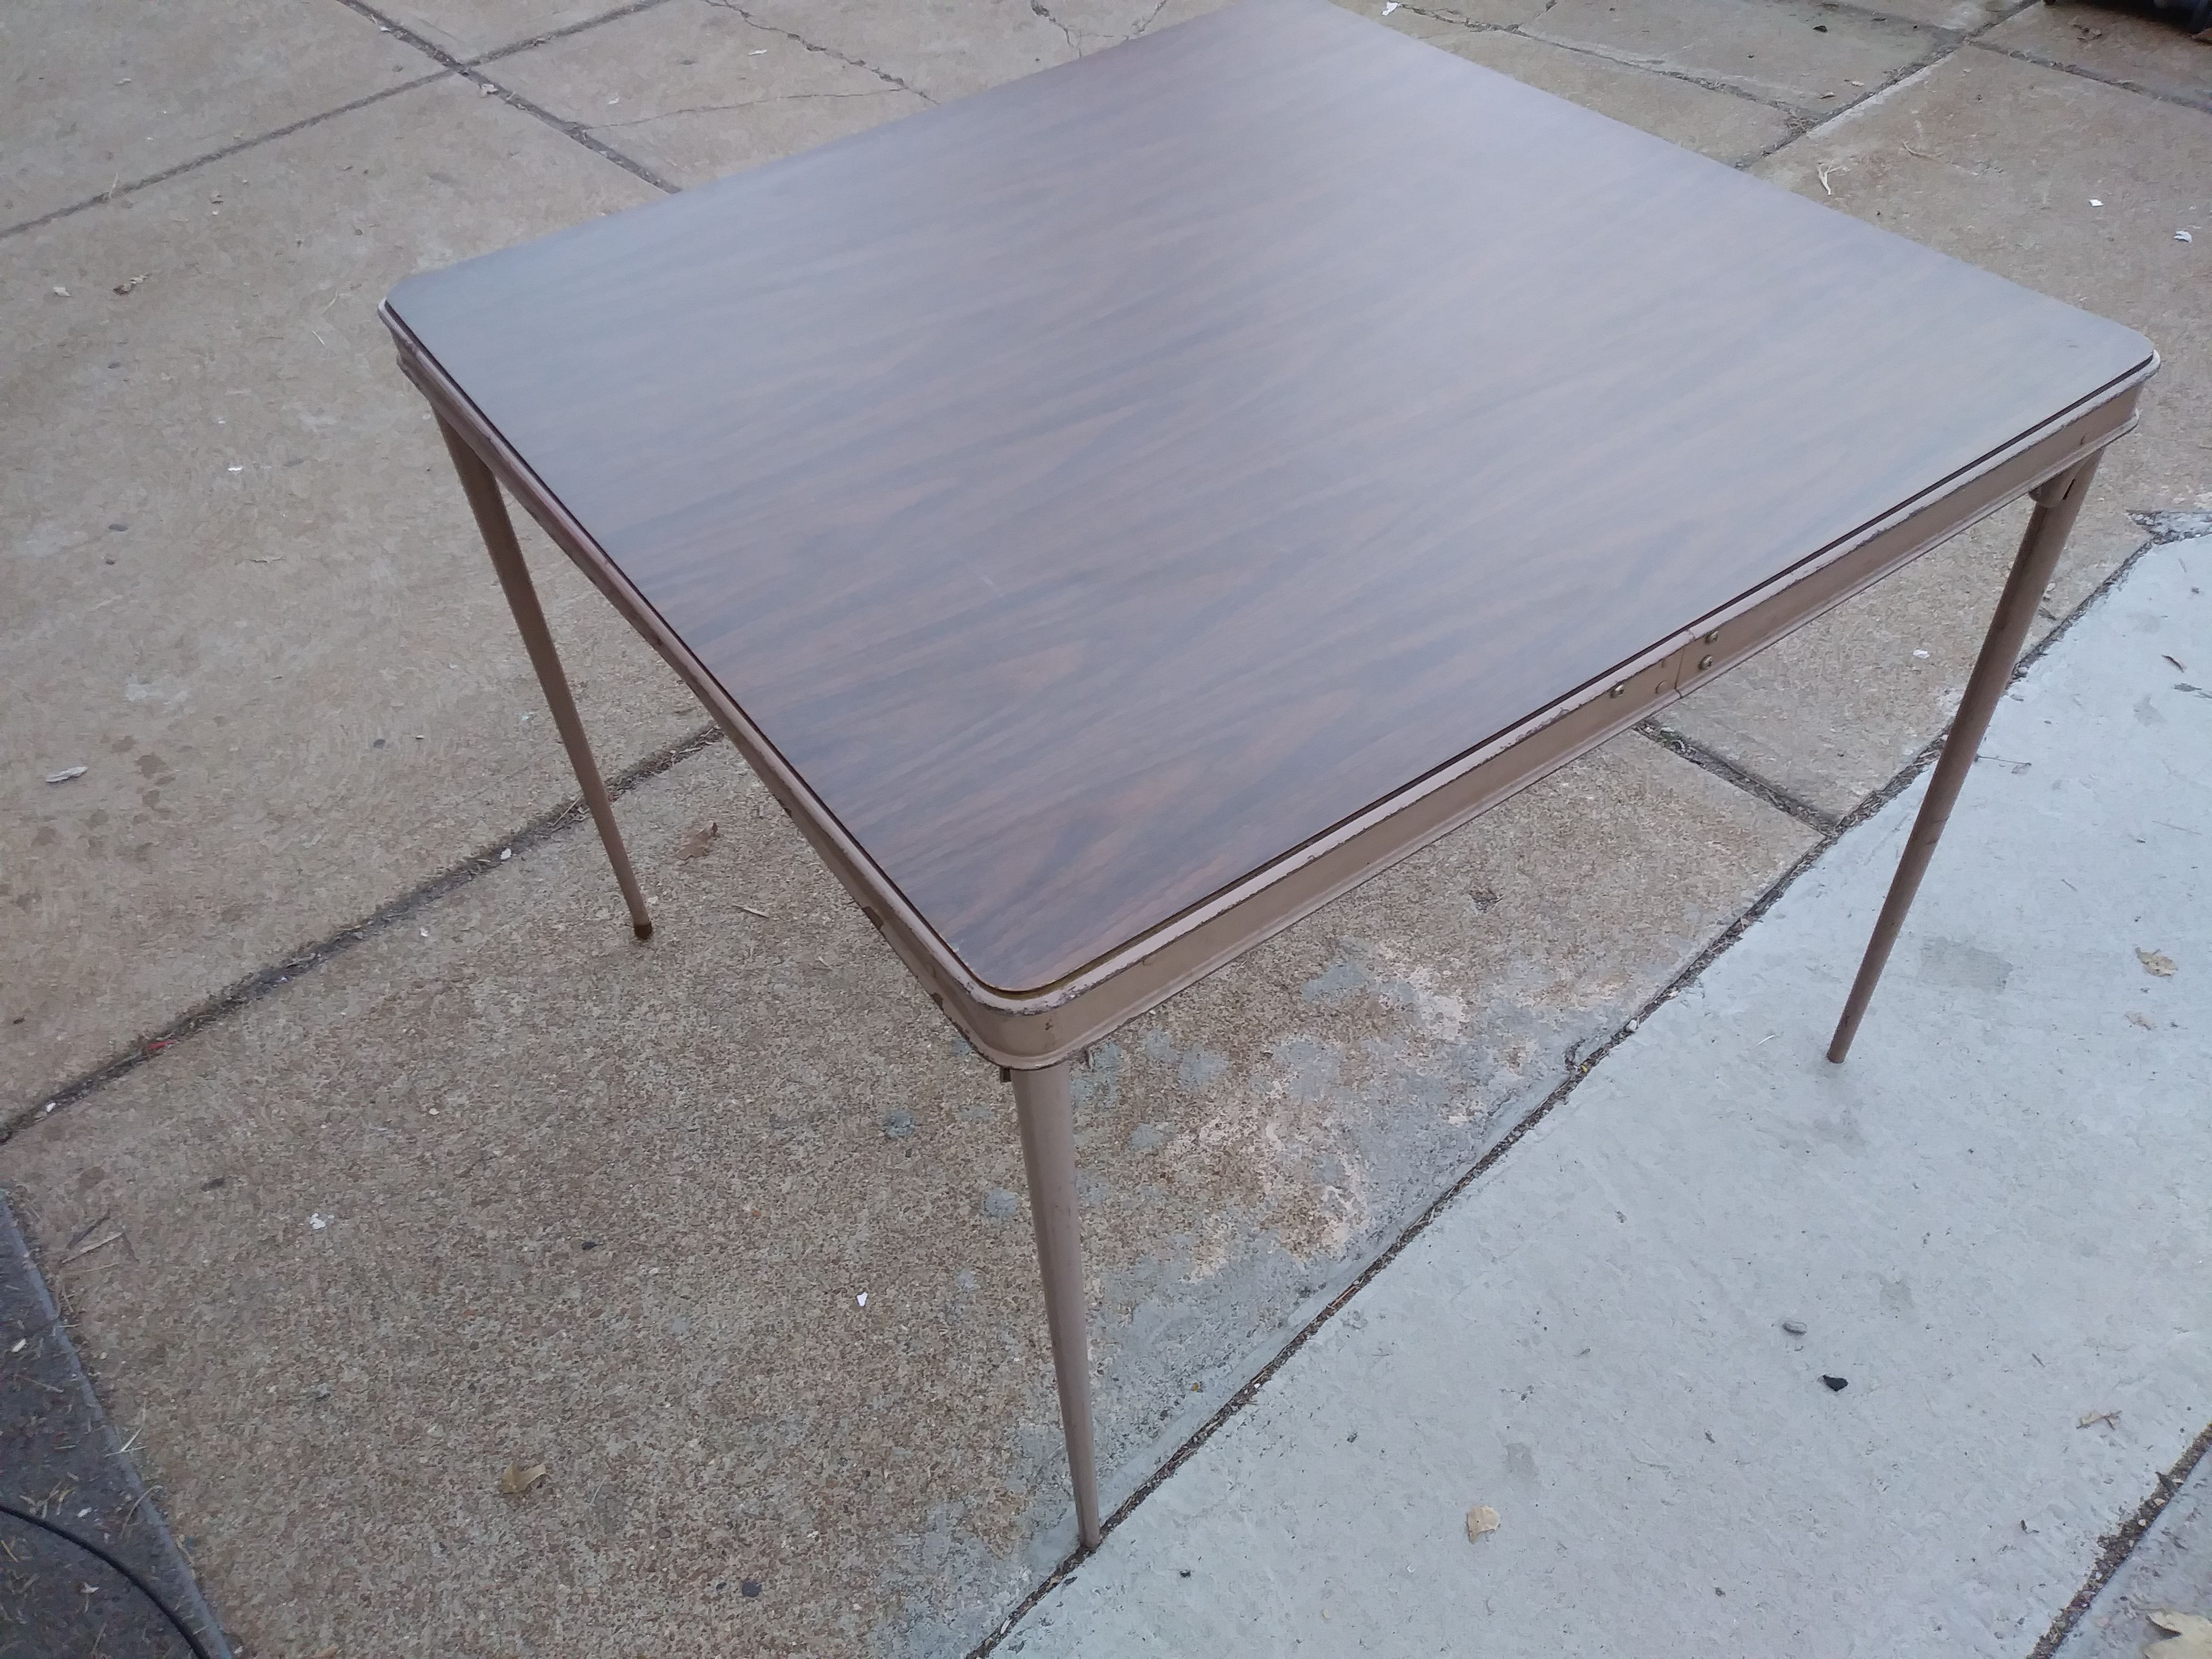 3ft x 3ft folding tables for sale